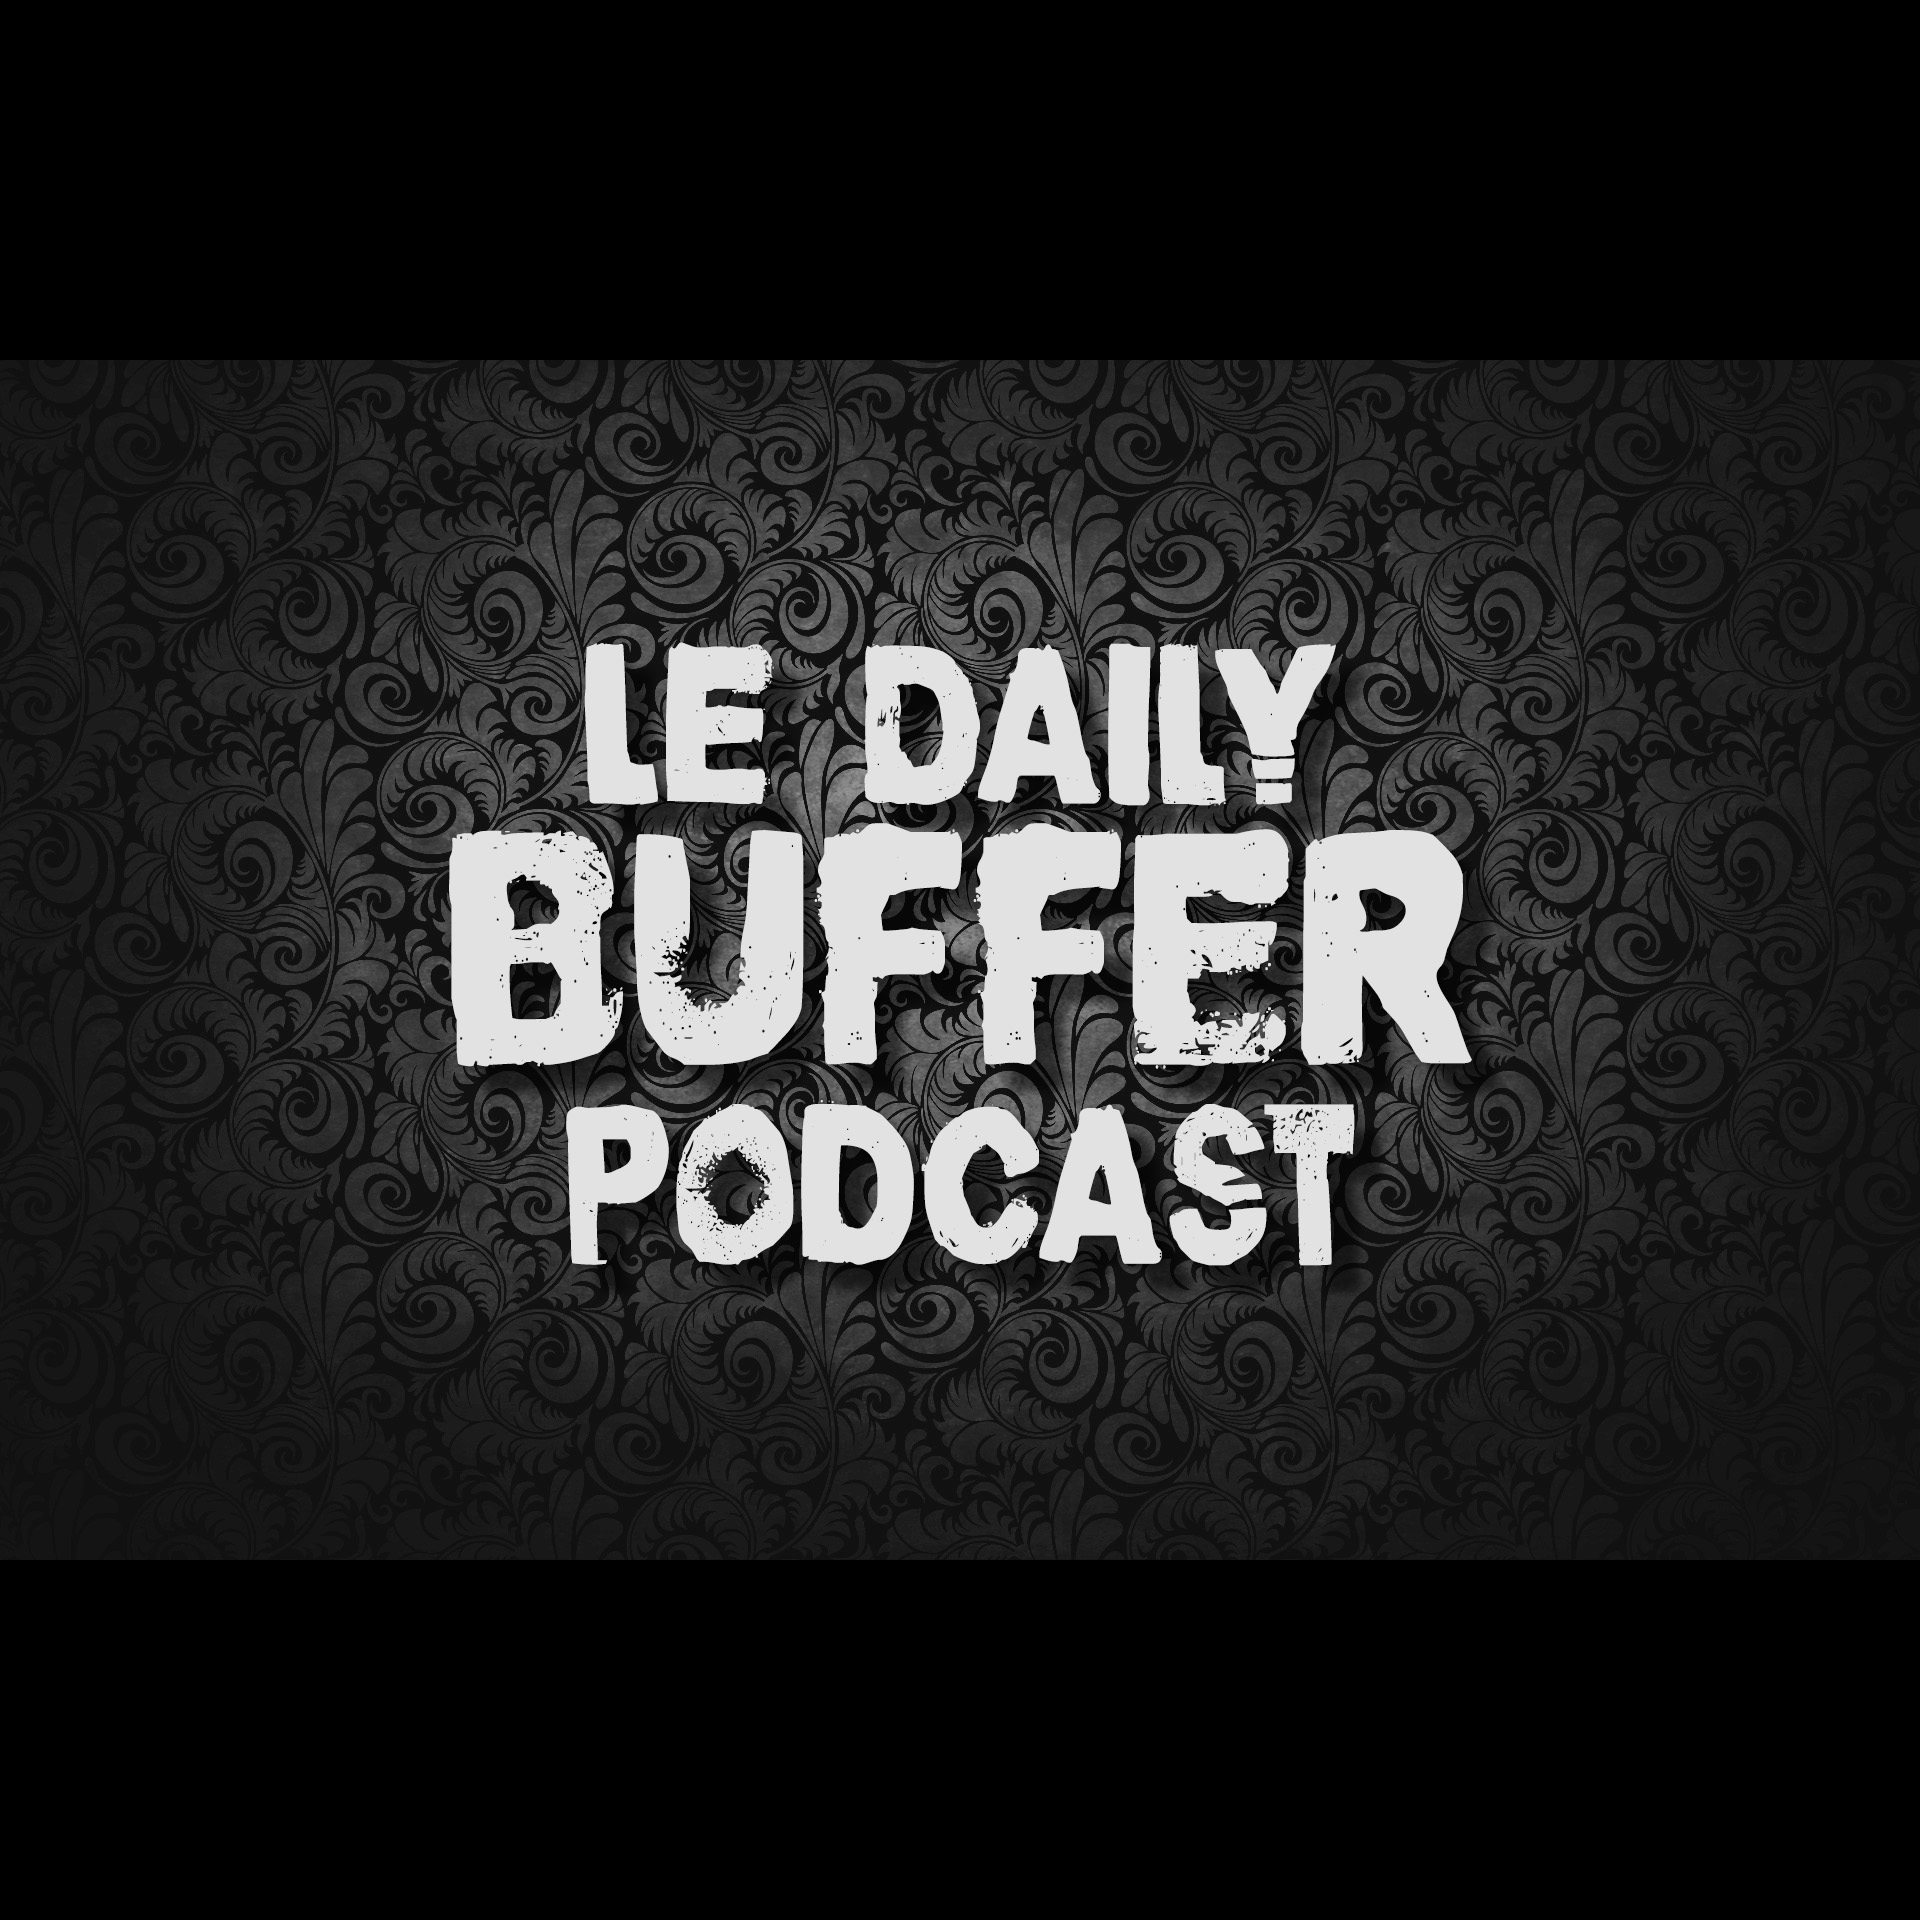 Le Daily Buffer Podcast - 2019 02 04 - SuperBored